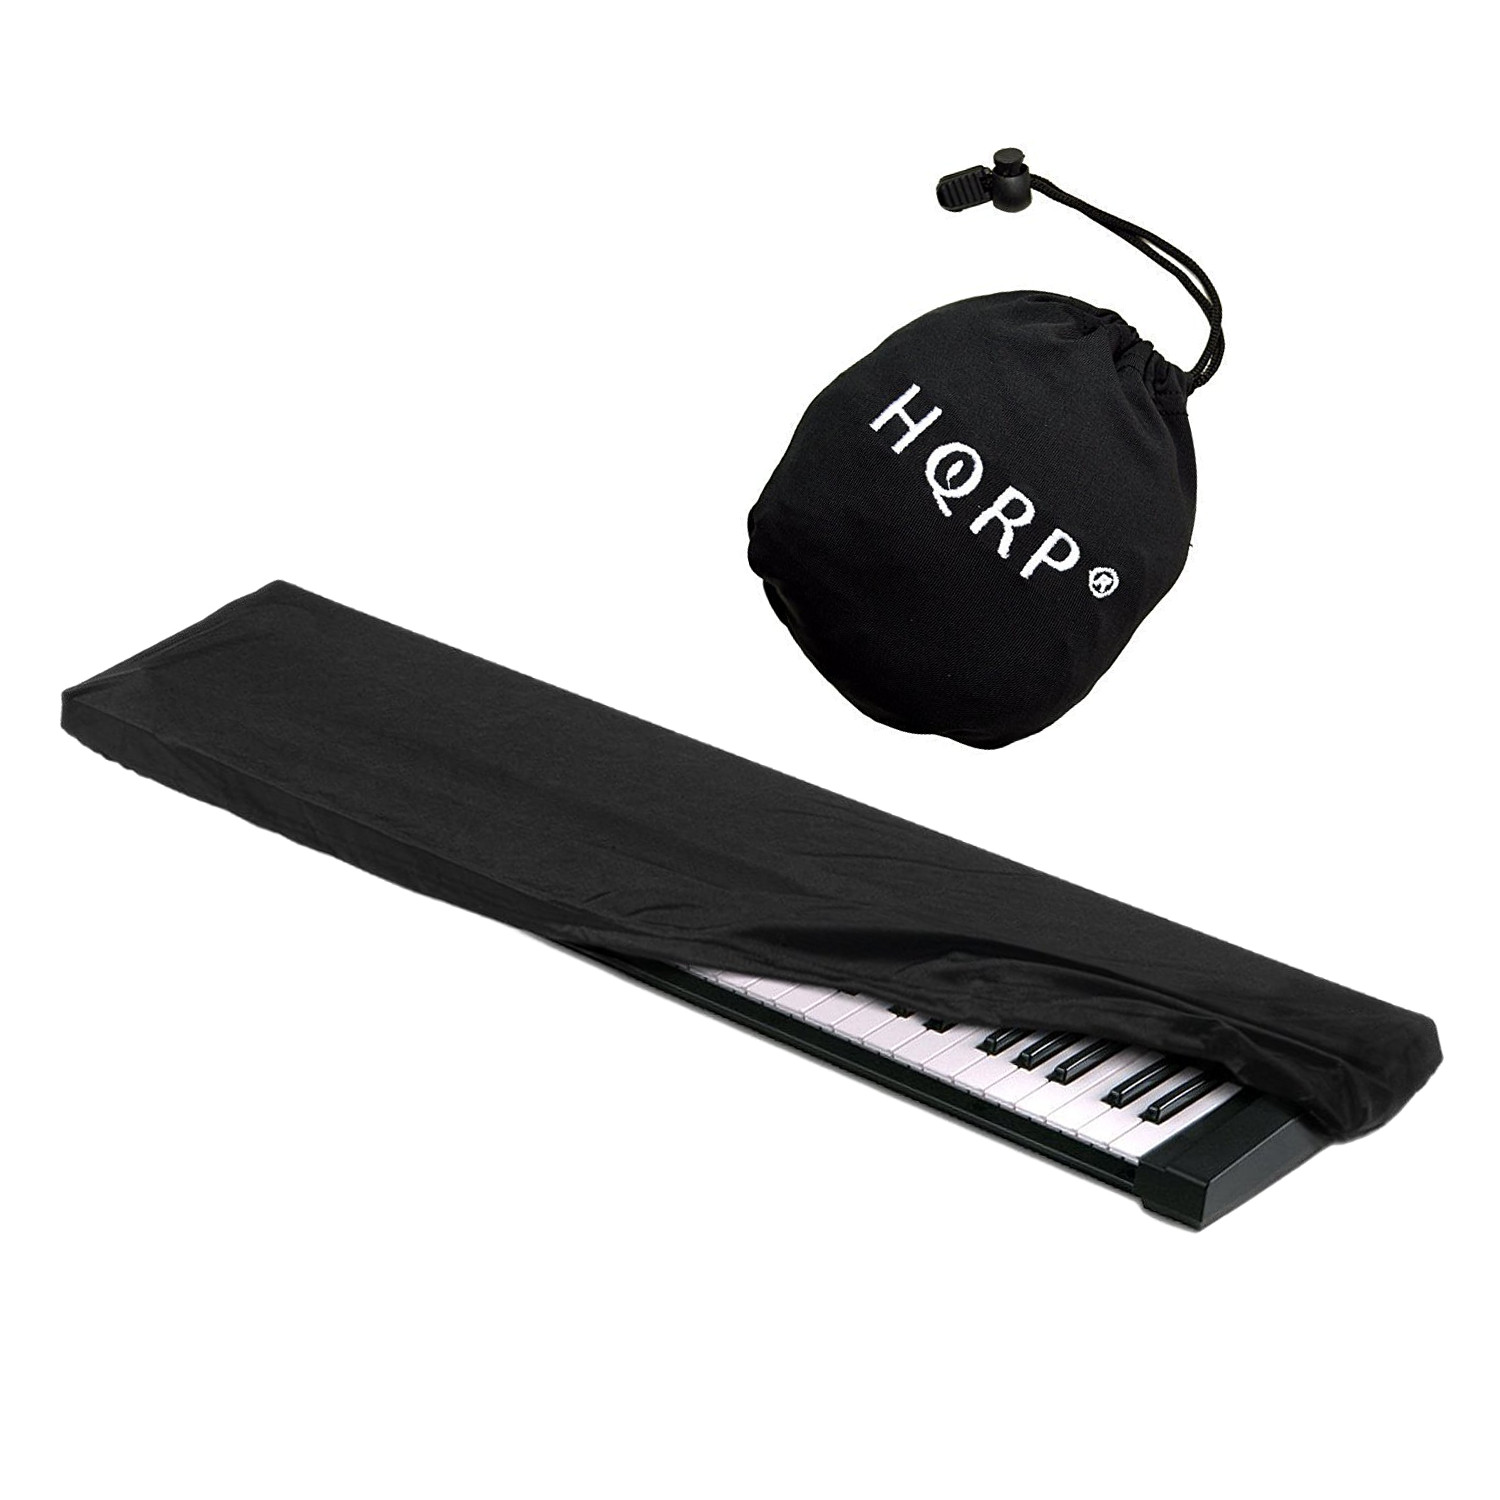 HQRP Elastic Keyboard Dust Cover for Roland JUNO-60 JUNO-D JUNO-Di JUNO-G  JUNO-Gi JUNO-STAGE Digital Piano Synthesizer + HQRP Coaster - Walmart.com